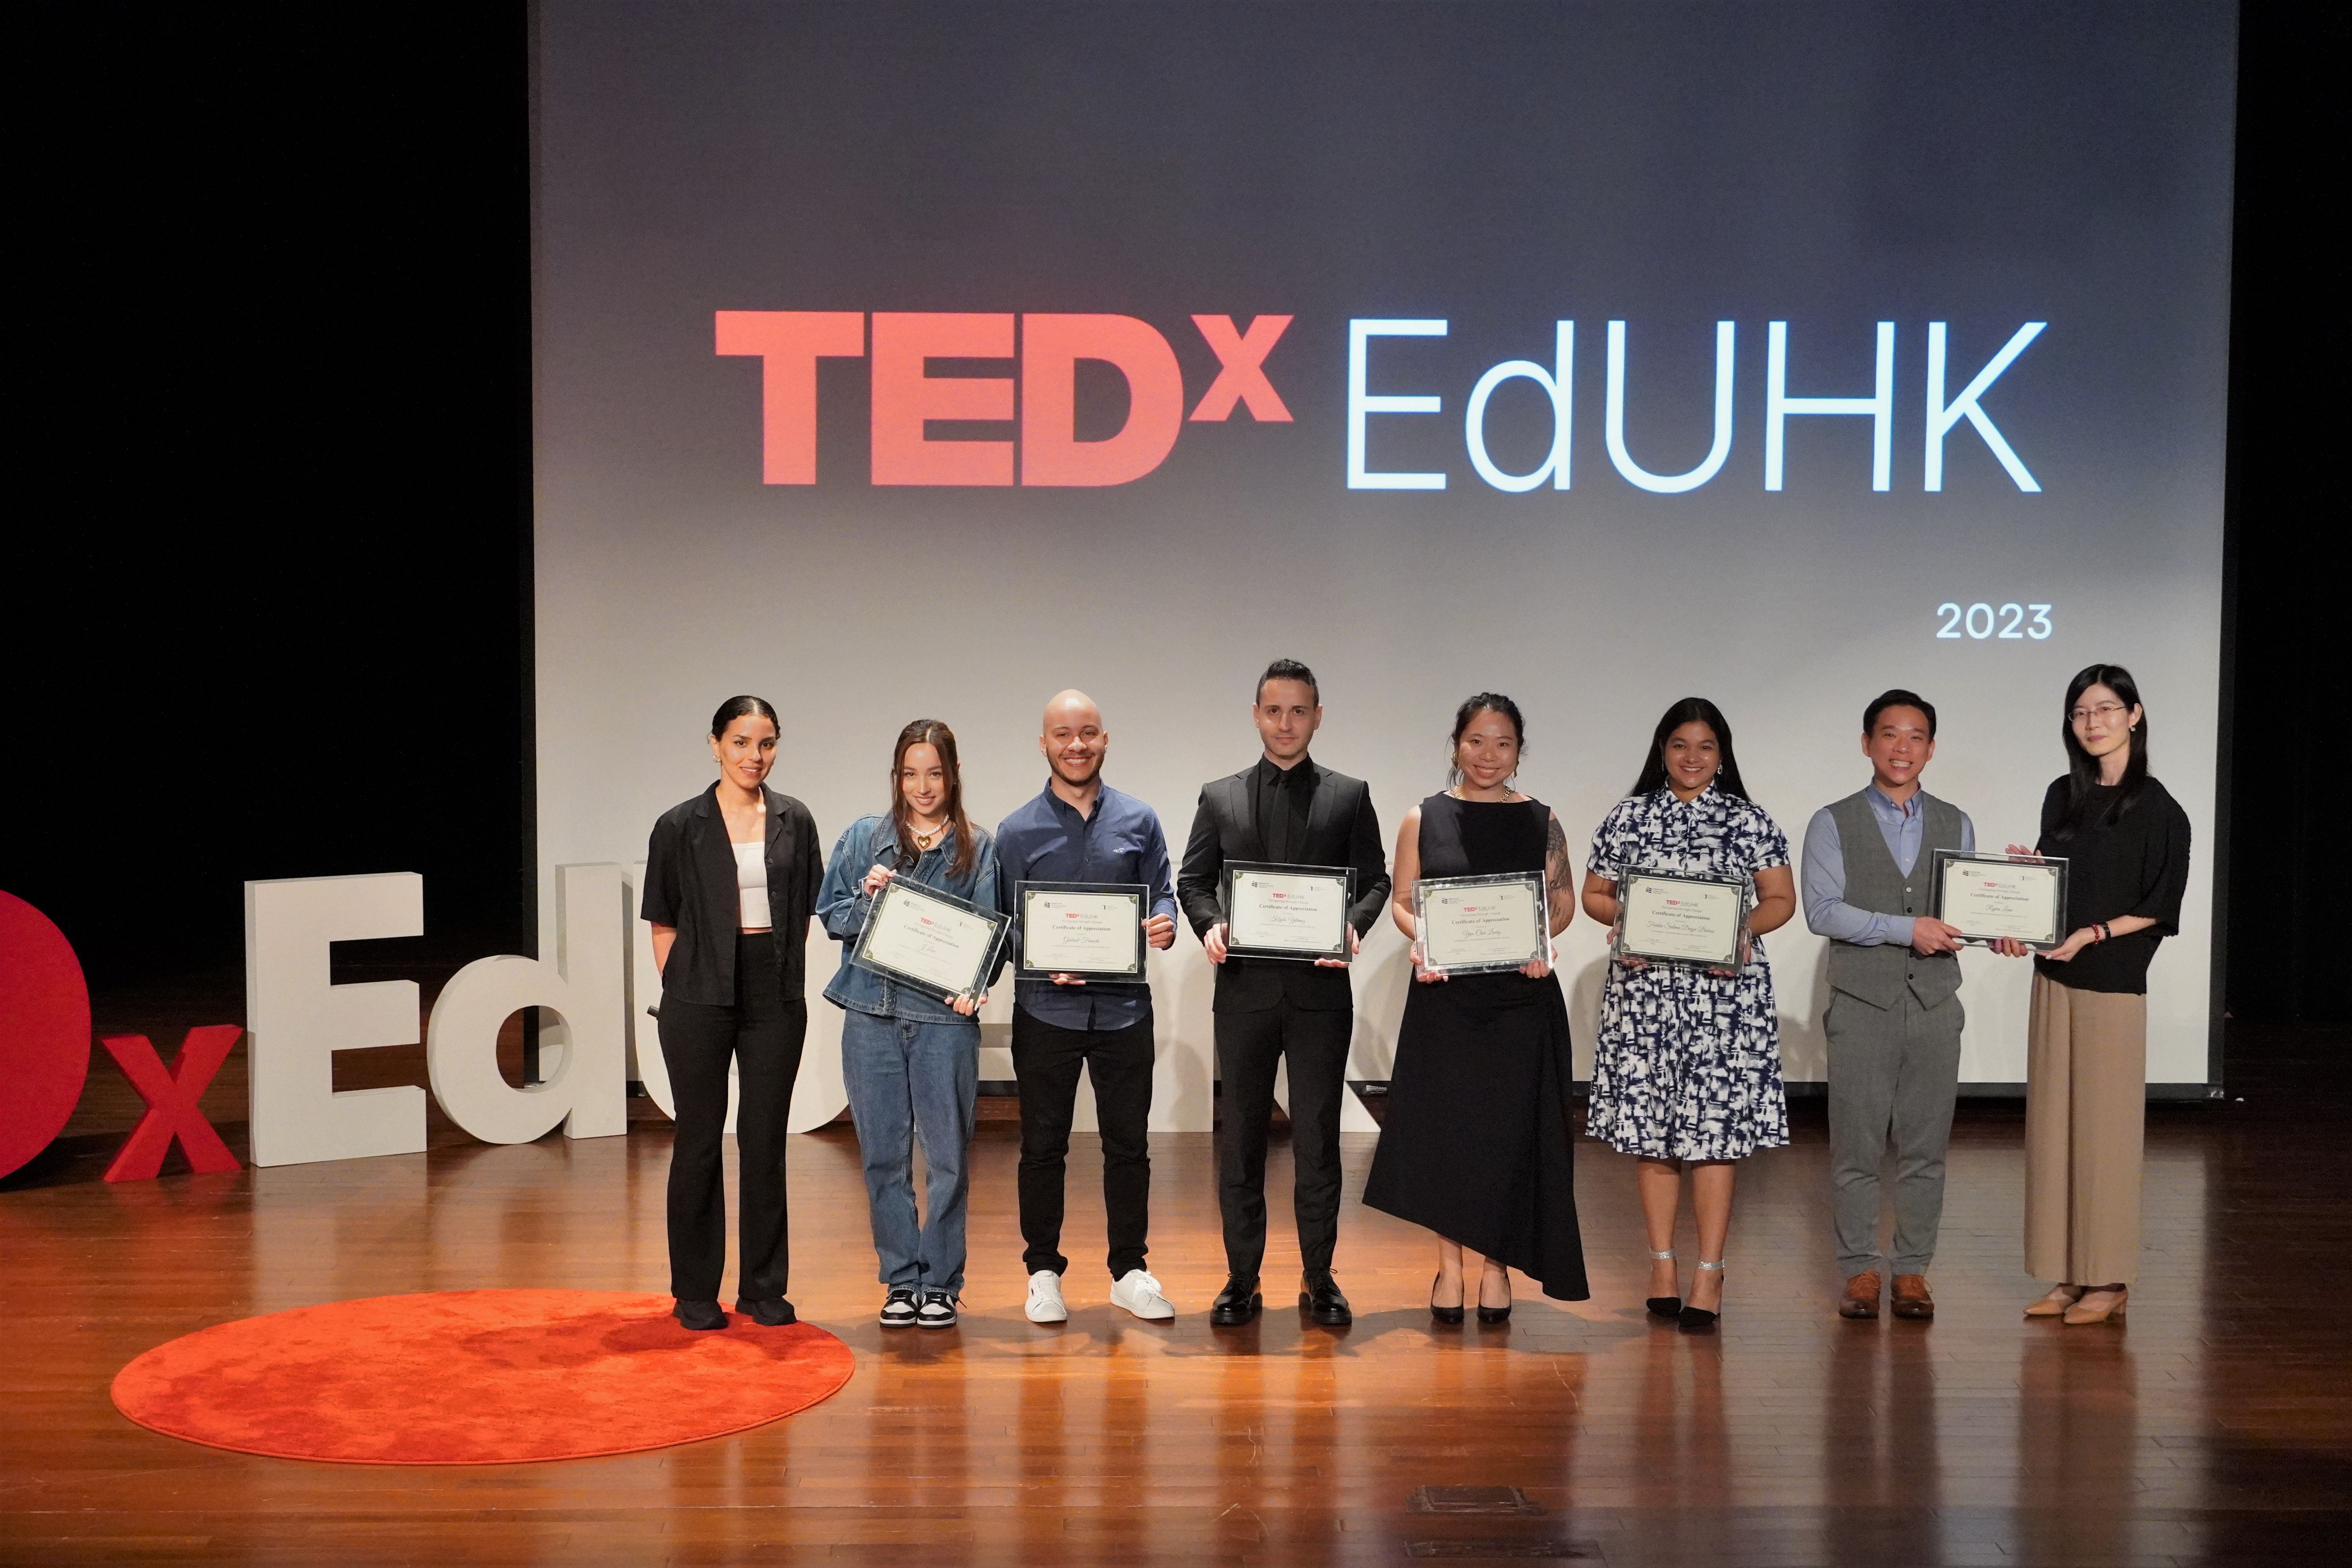 Six speakers at the TEDxEdUHK event